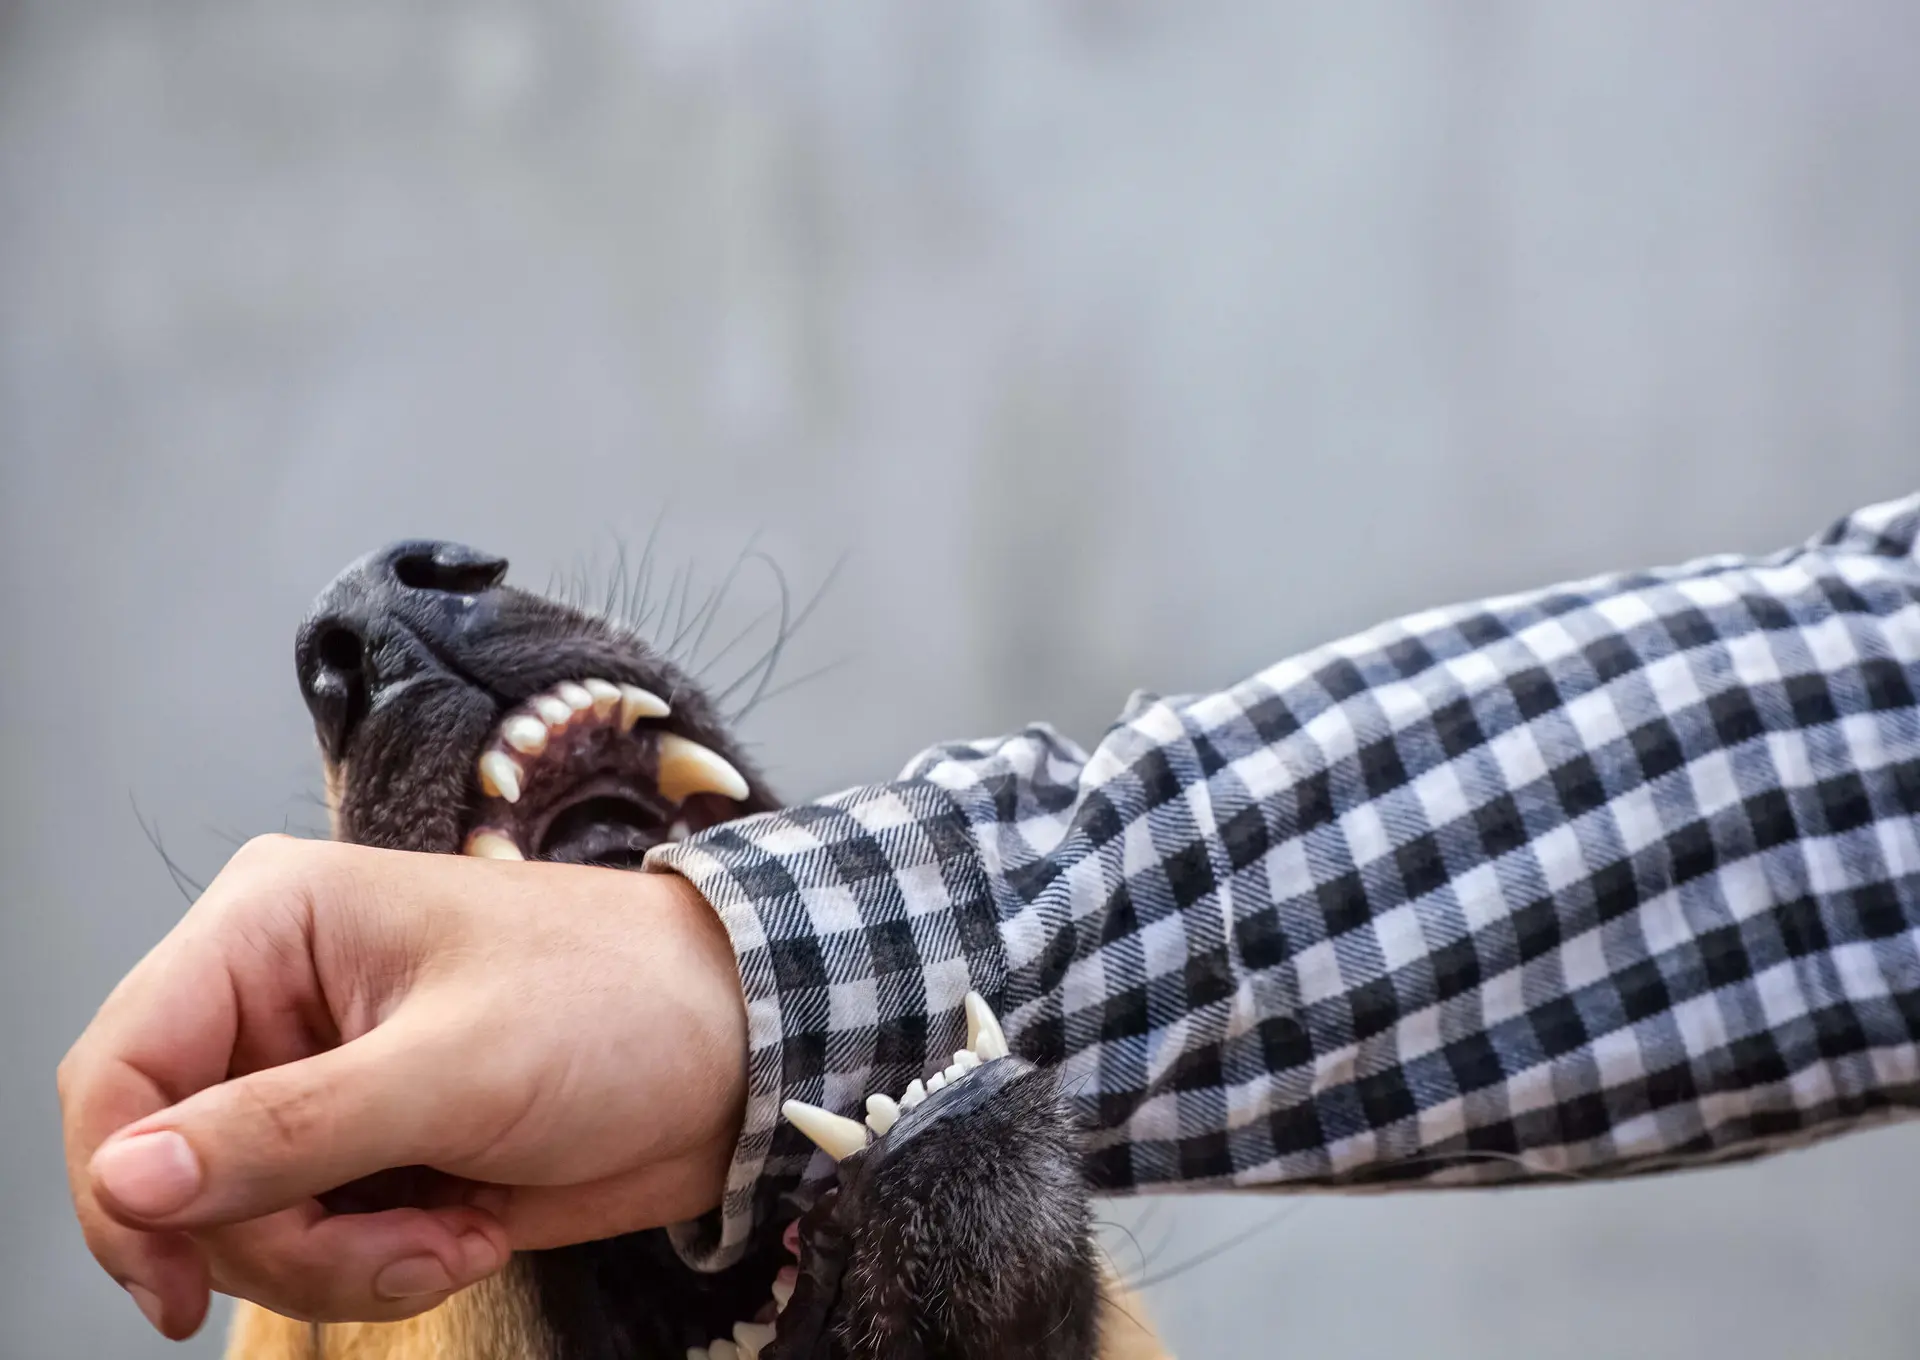 A dog is biting a man's wrist. The man is wearing a long sleeve flannel shirt.